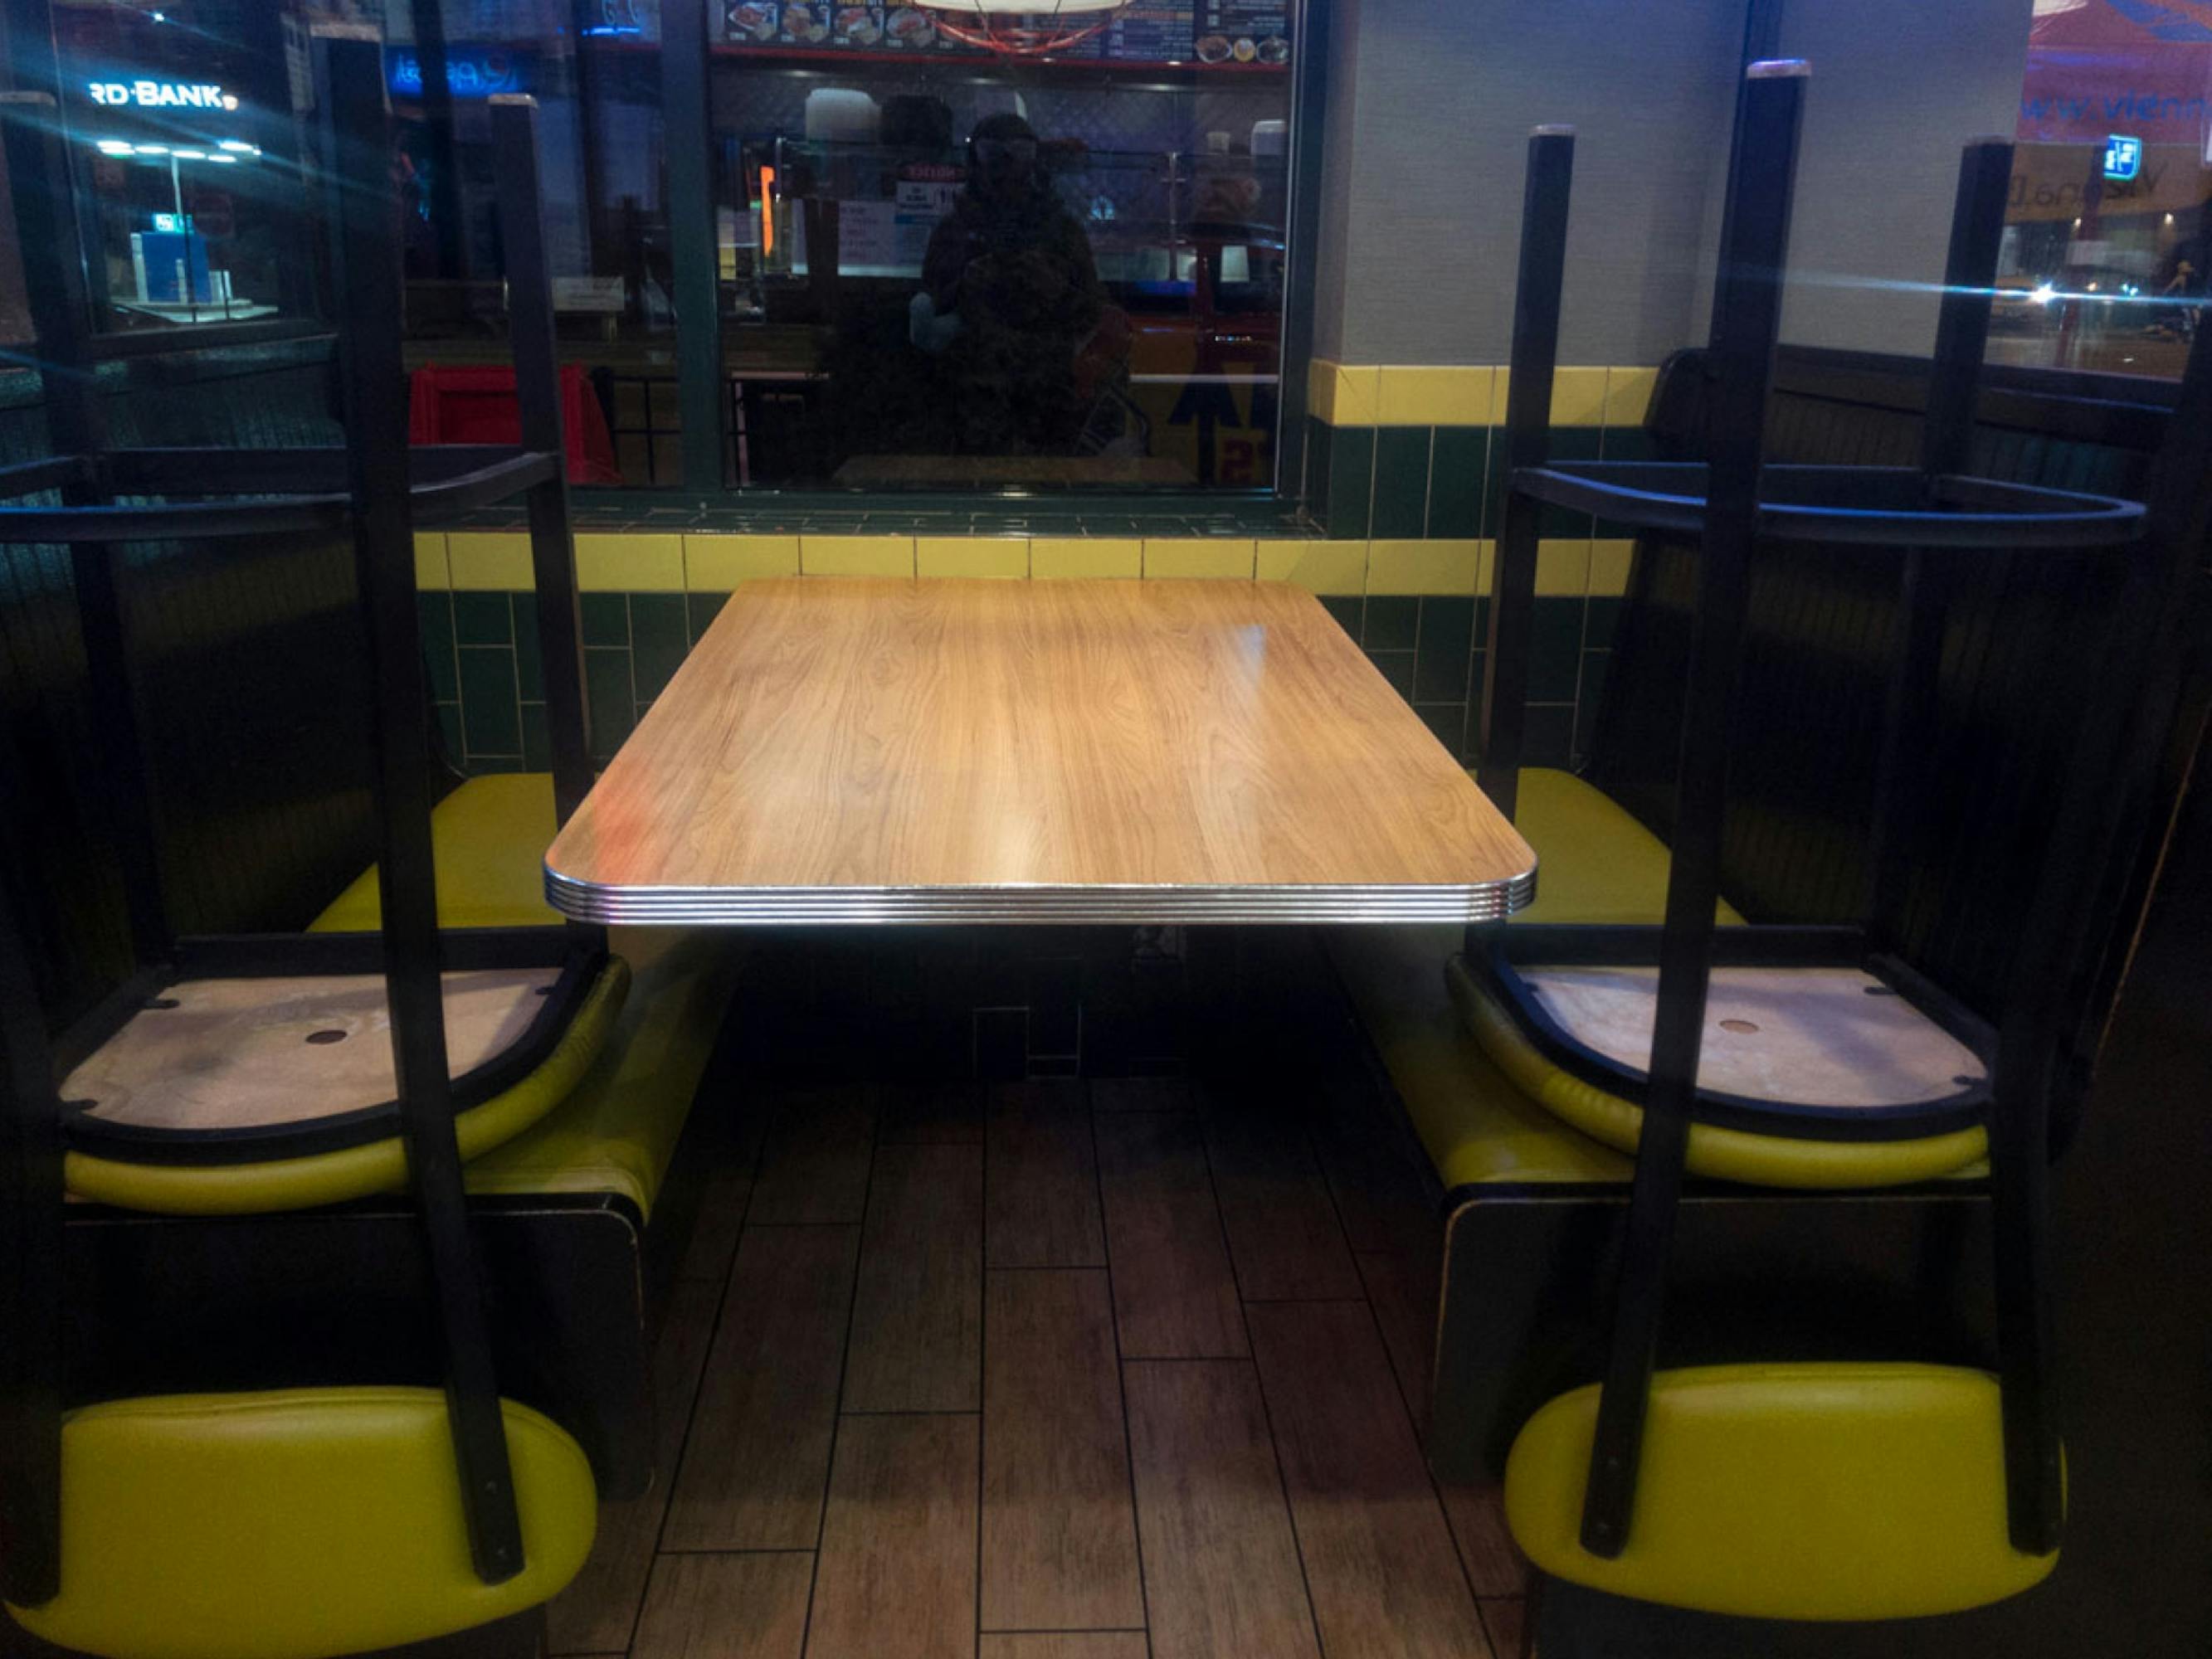 A photograph of an empty, green and yellow restaurant booth, charis set upside down as if at closing time. There is a neon glow to the picture, and you can see the reflection of the photographer in the window.